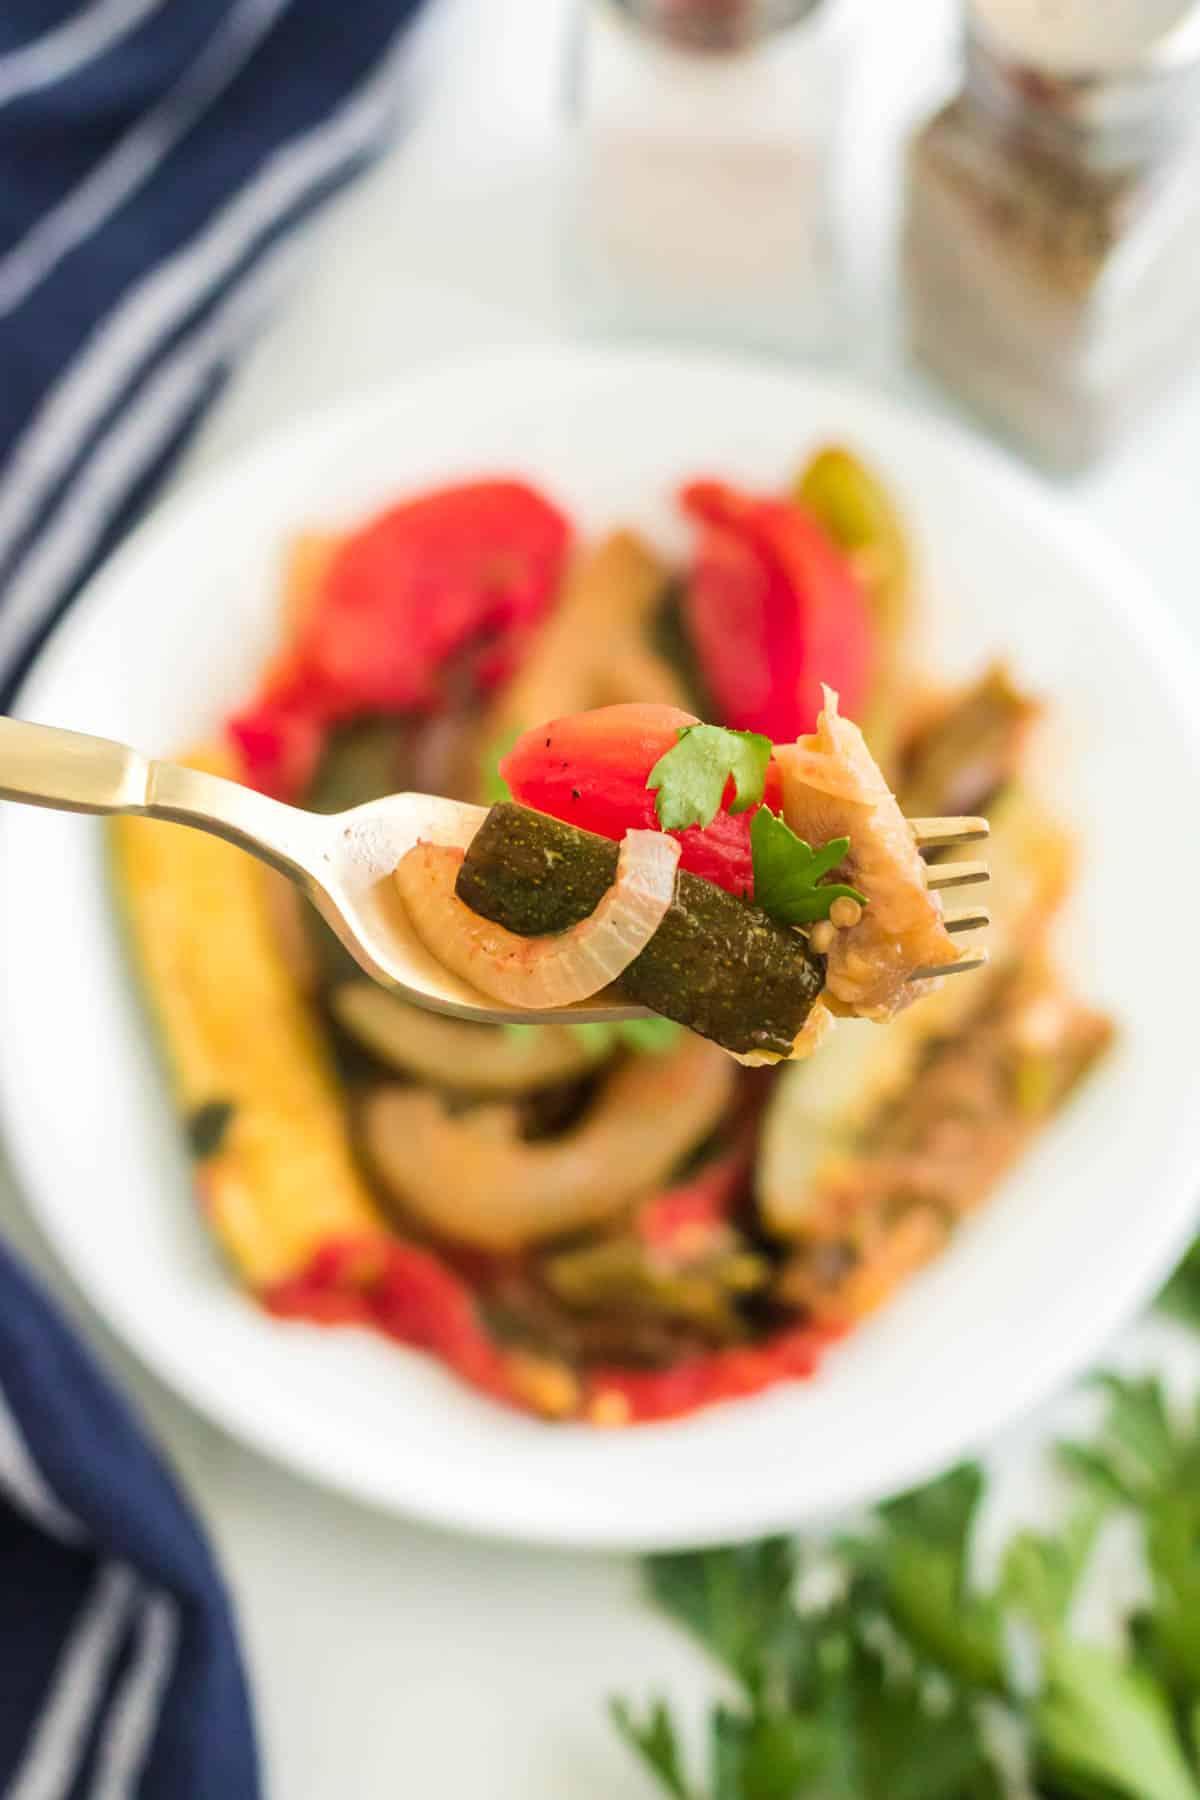 A bite of ratatouille on a fork with a plate of vegetable casserole in the background